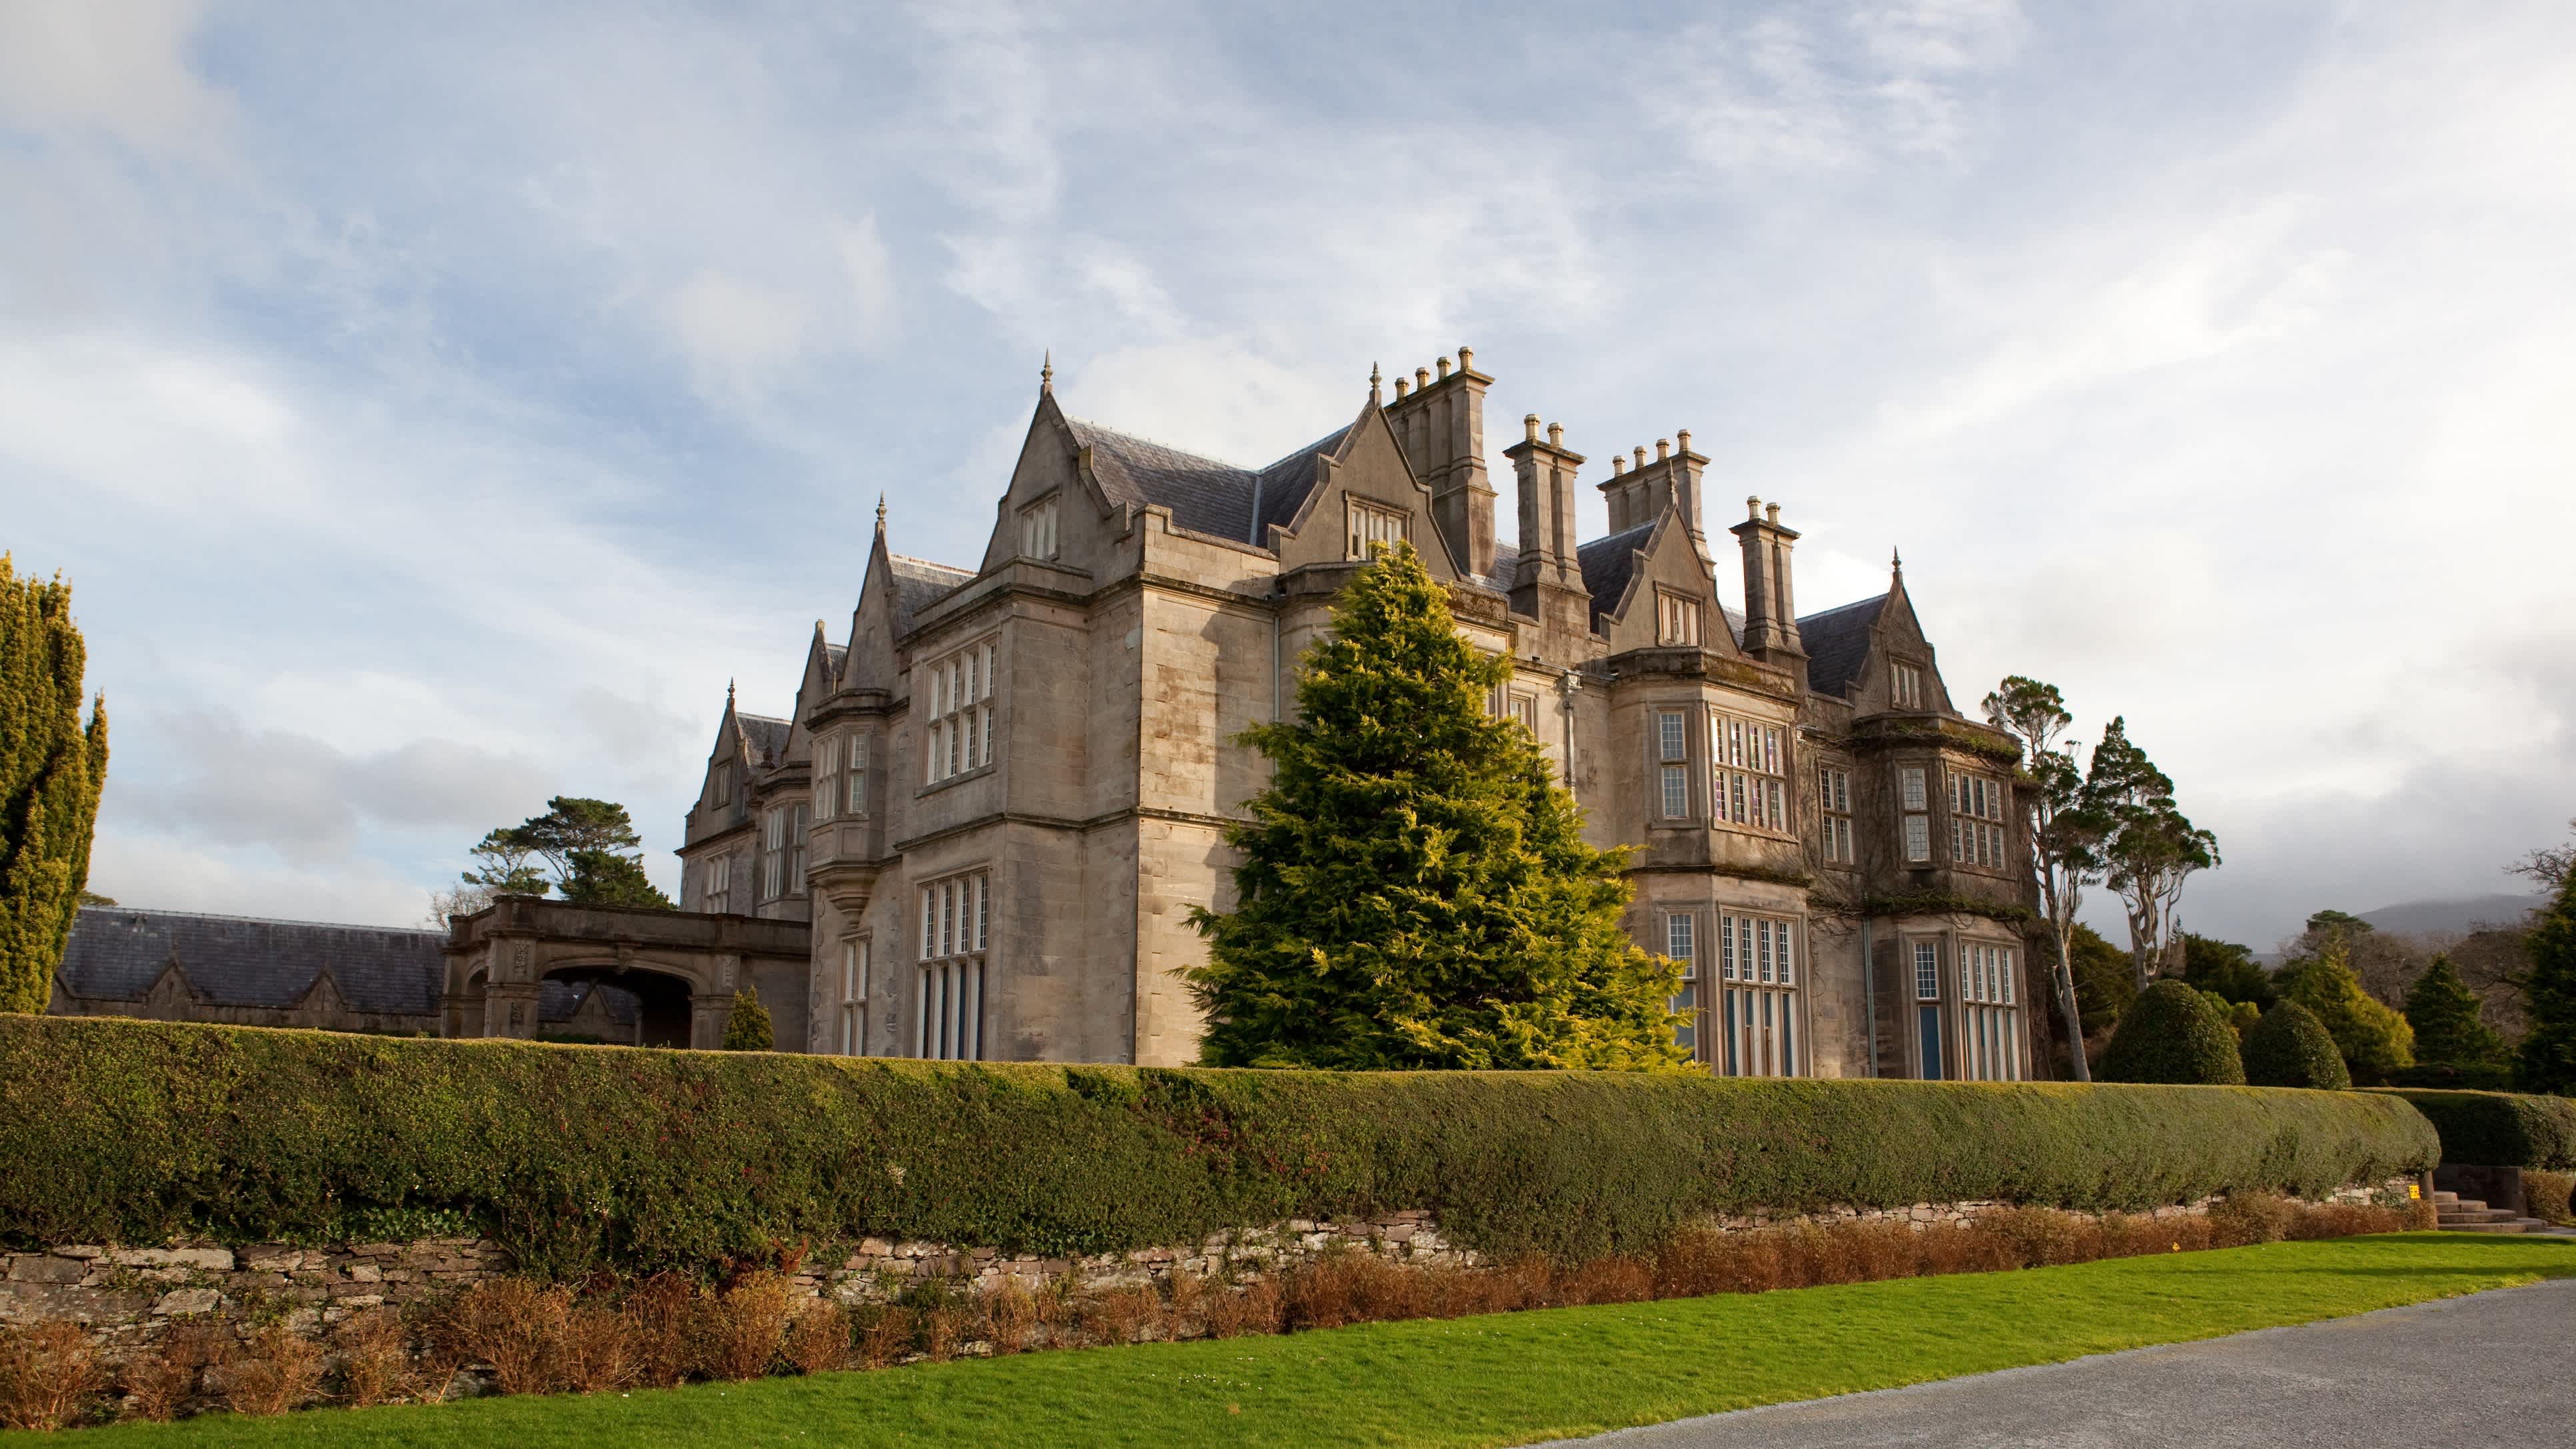 See Muckross House, pictured here, on a Killarney vacation